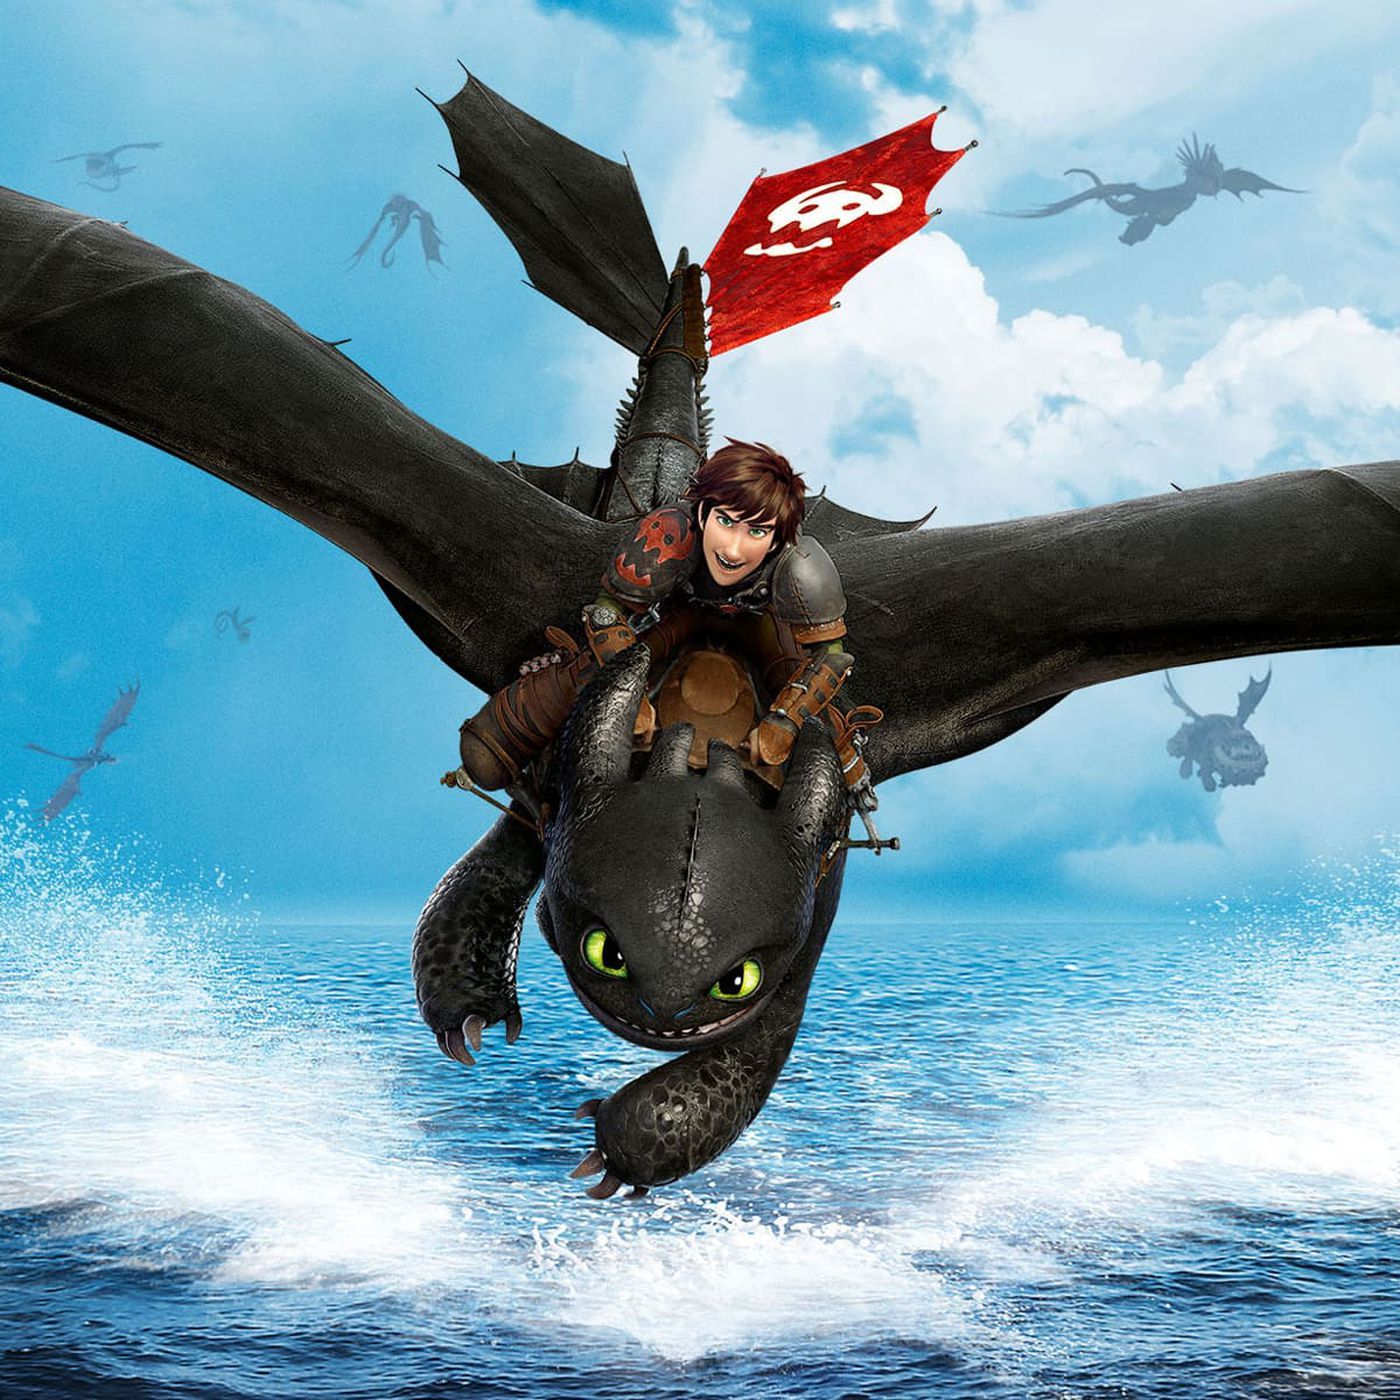 How To Train Your Dragon's Music Is Star Wars Level Great. Here's